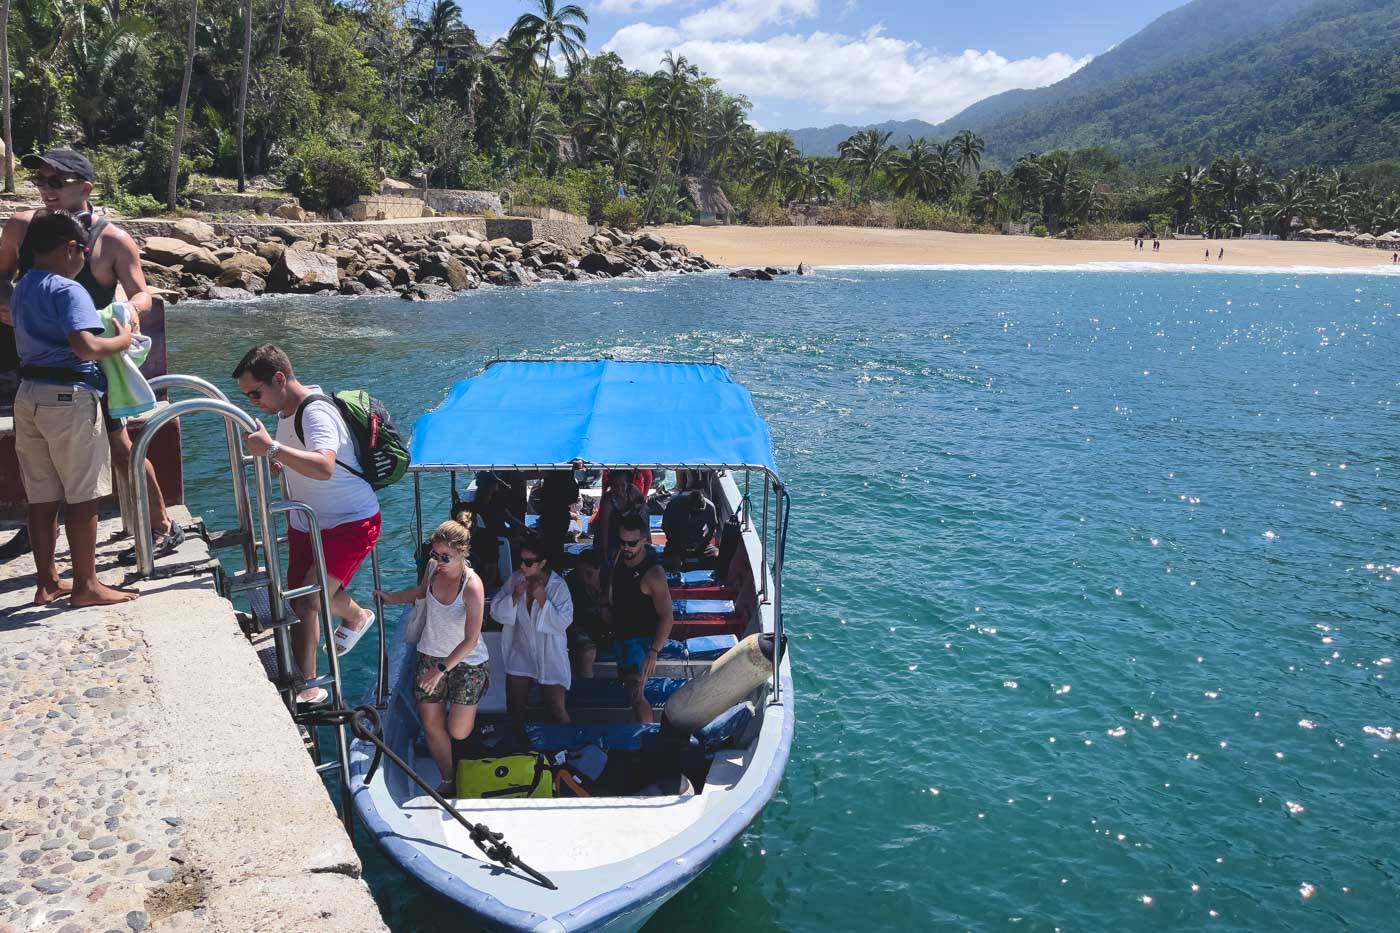 A group of people disembarking the water taxi at the pier in Yelapa.